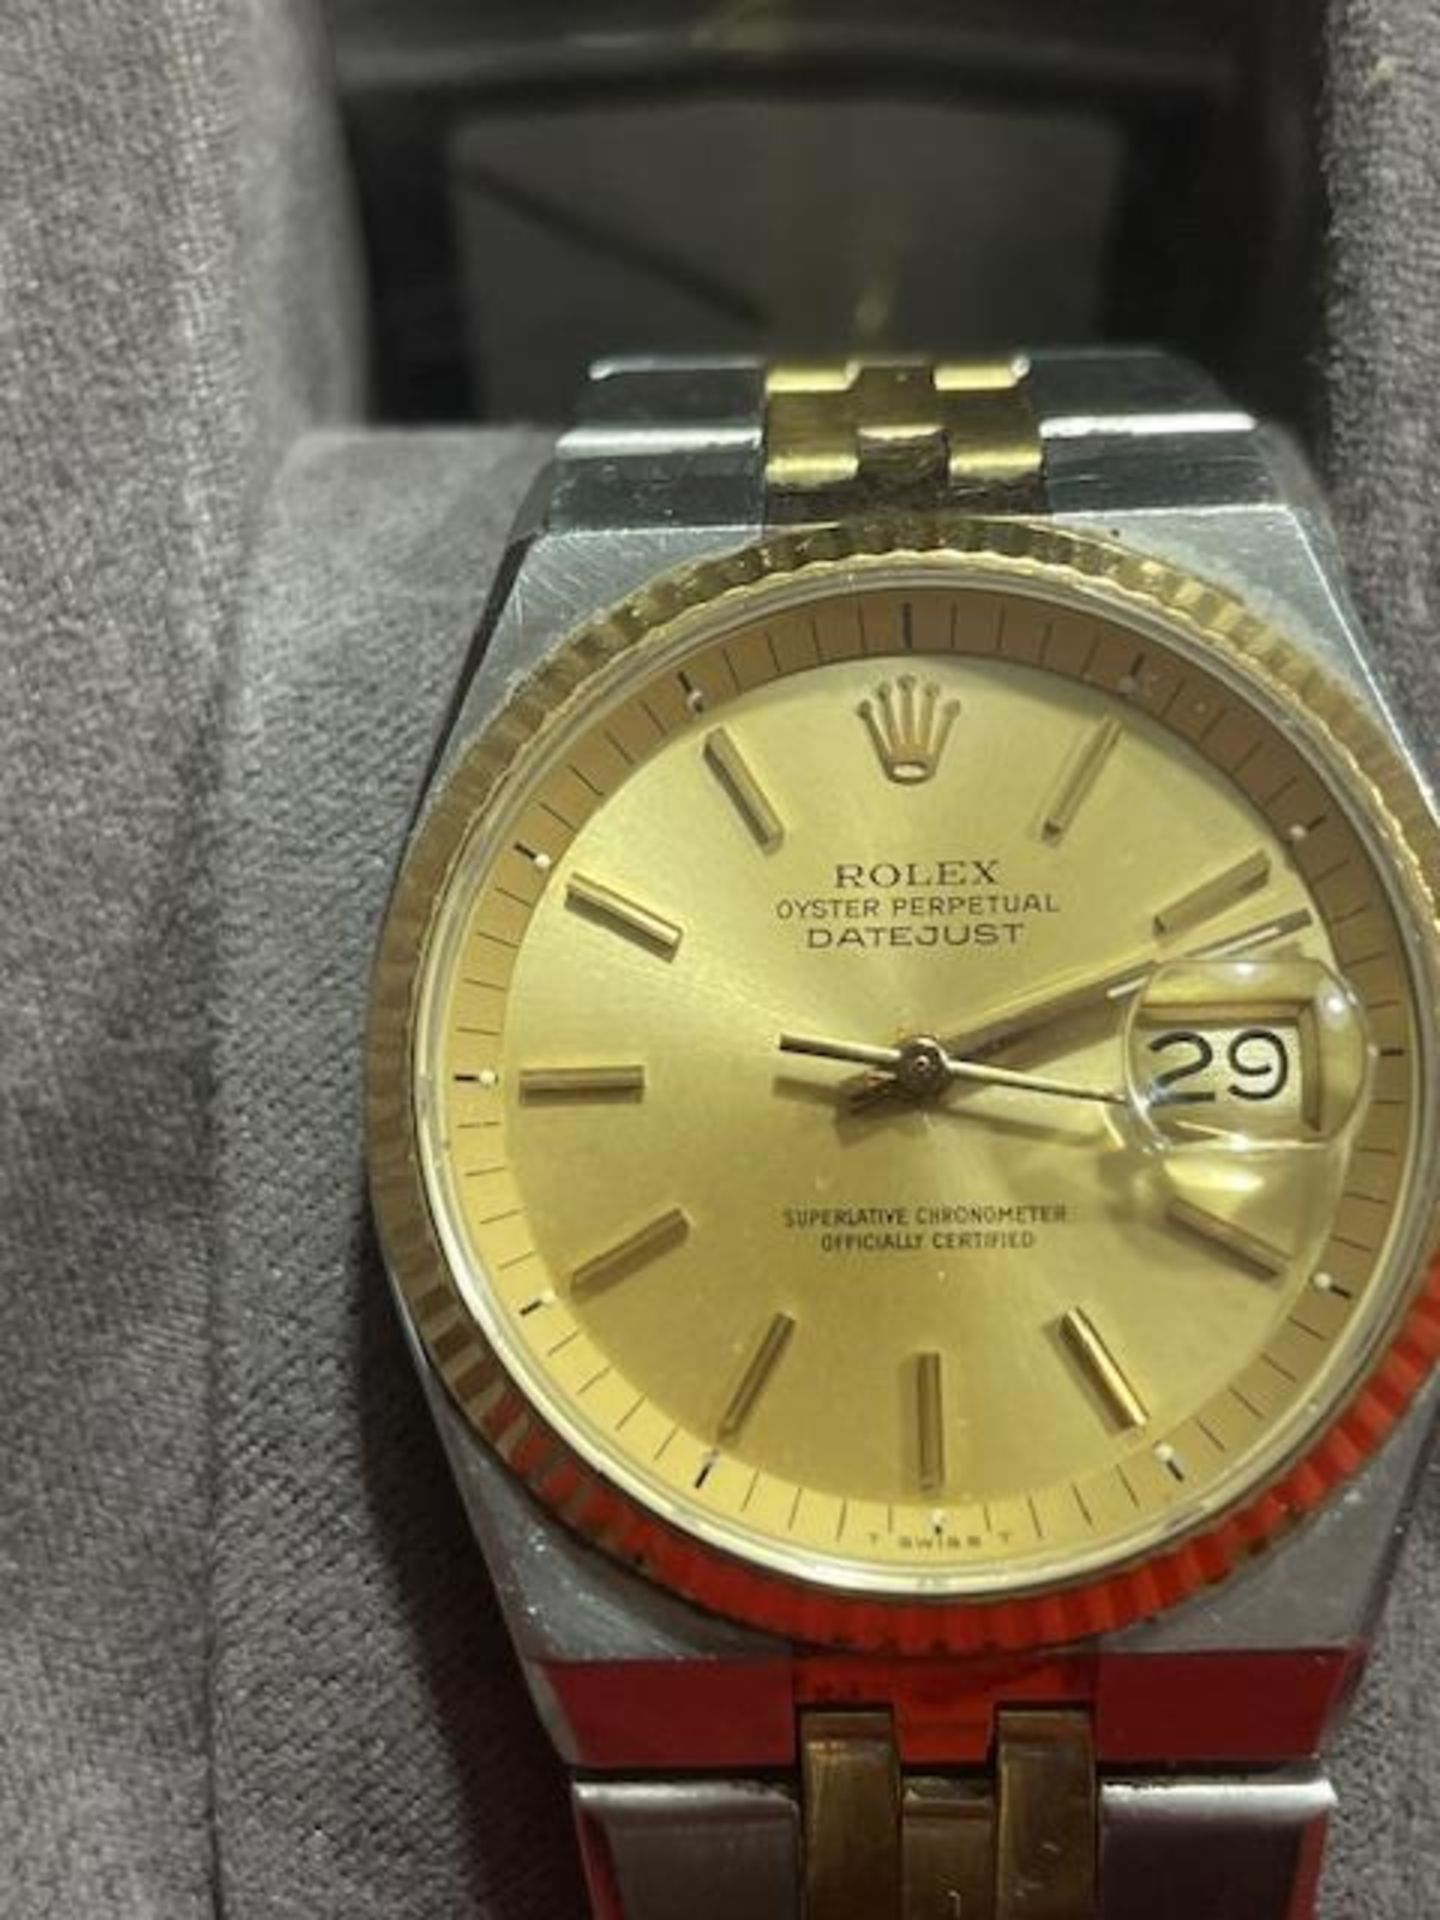 Rolex Oyster Purpetual DATEJUST Mens Watch - Image 5 of 10